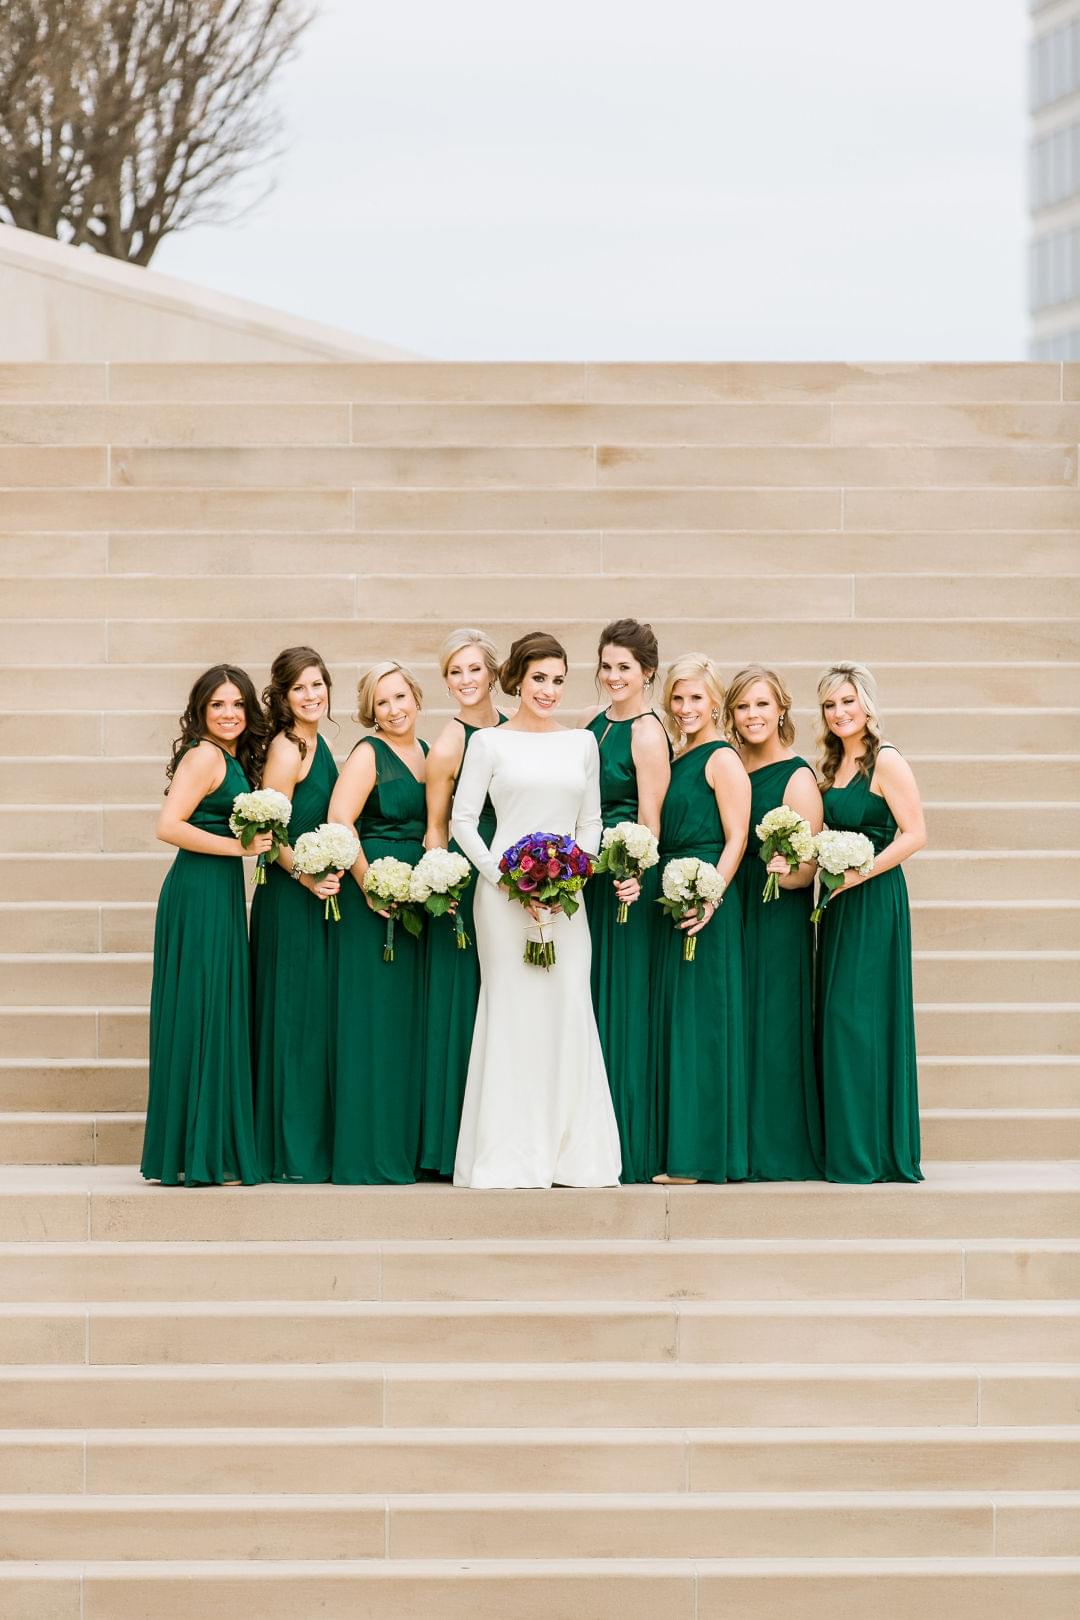 12 Gorgeous Emerald Green Bridesmaid Dress photos that will show you why this is the fanciest green shade for your wedding. Photo: Catherine Rhodes Photography.⠀⠀⠀⠀⠀⠀⠀⠀⠀ ⠀⠀⠀⠀⠀⠀⠀⠀⠀⠀⠀⠀⠀⠀⠀⠀⠀⠀⠀⠀⠀⠀⠀ ❤⠀More #BridesmaidDresses inspiration: mysweetengagement.com/galleries/bridesmaids⠀⠀ ❤⠀More #EmeraldGreen #wedding inspiration on our Wedding Colors gallery: mysweetengagement.com/colors/emerald-green-wedding/